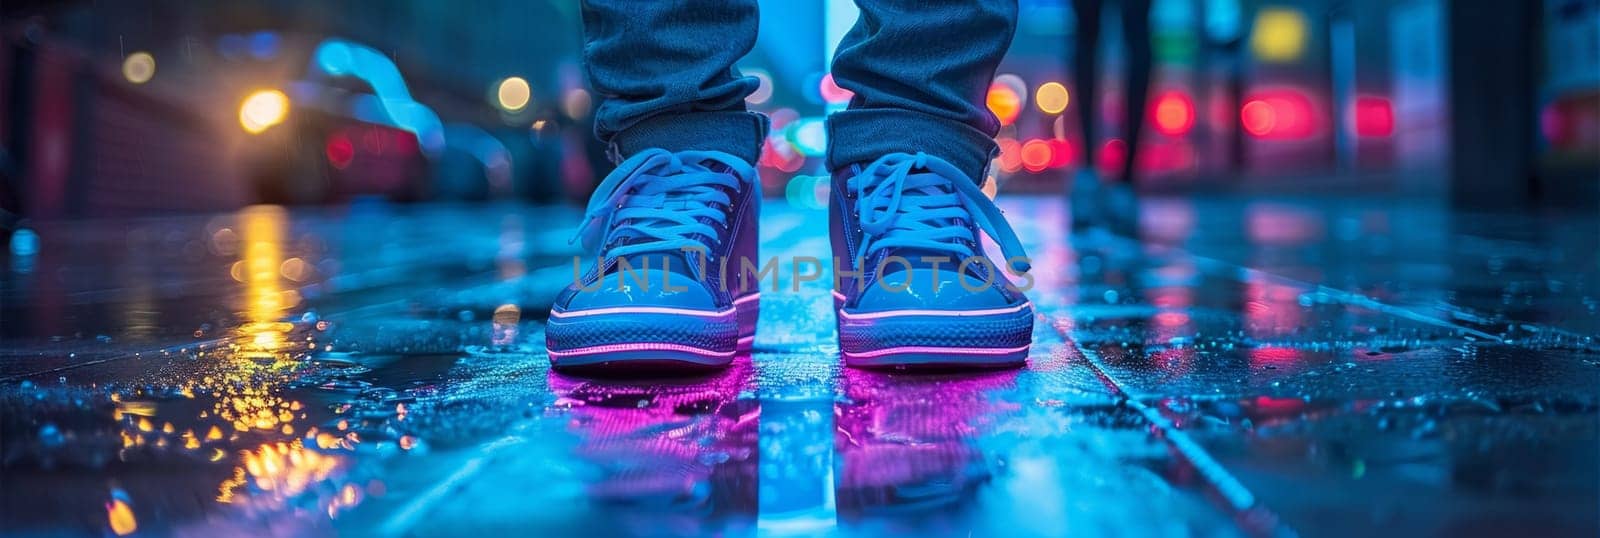 A person wearing bright blue shoes standing in a puddle of water, AI by starush